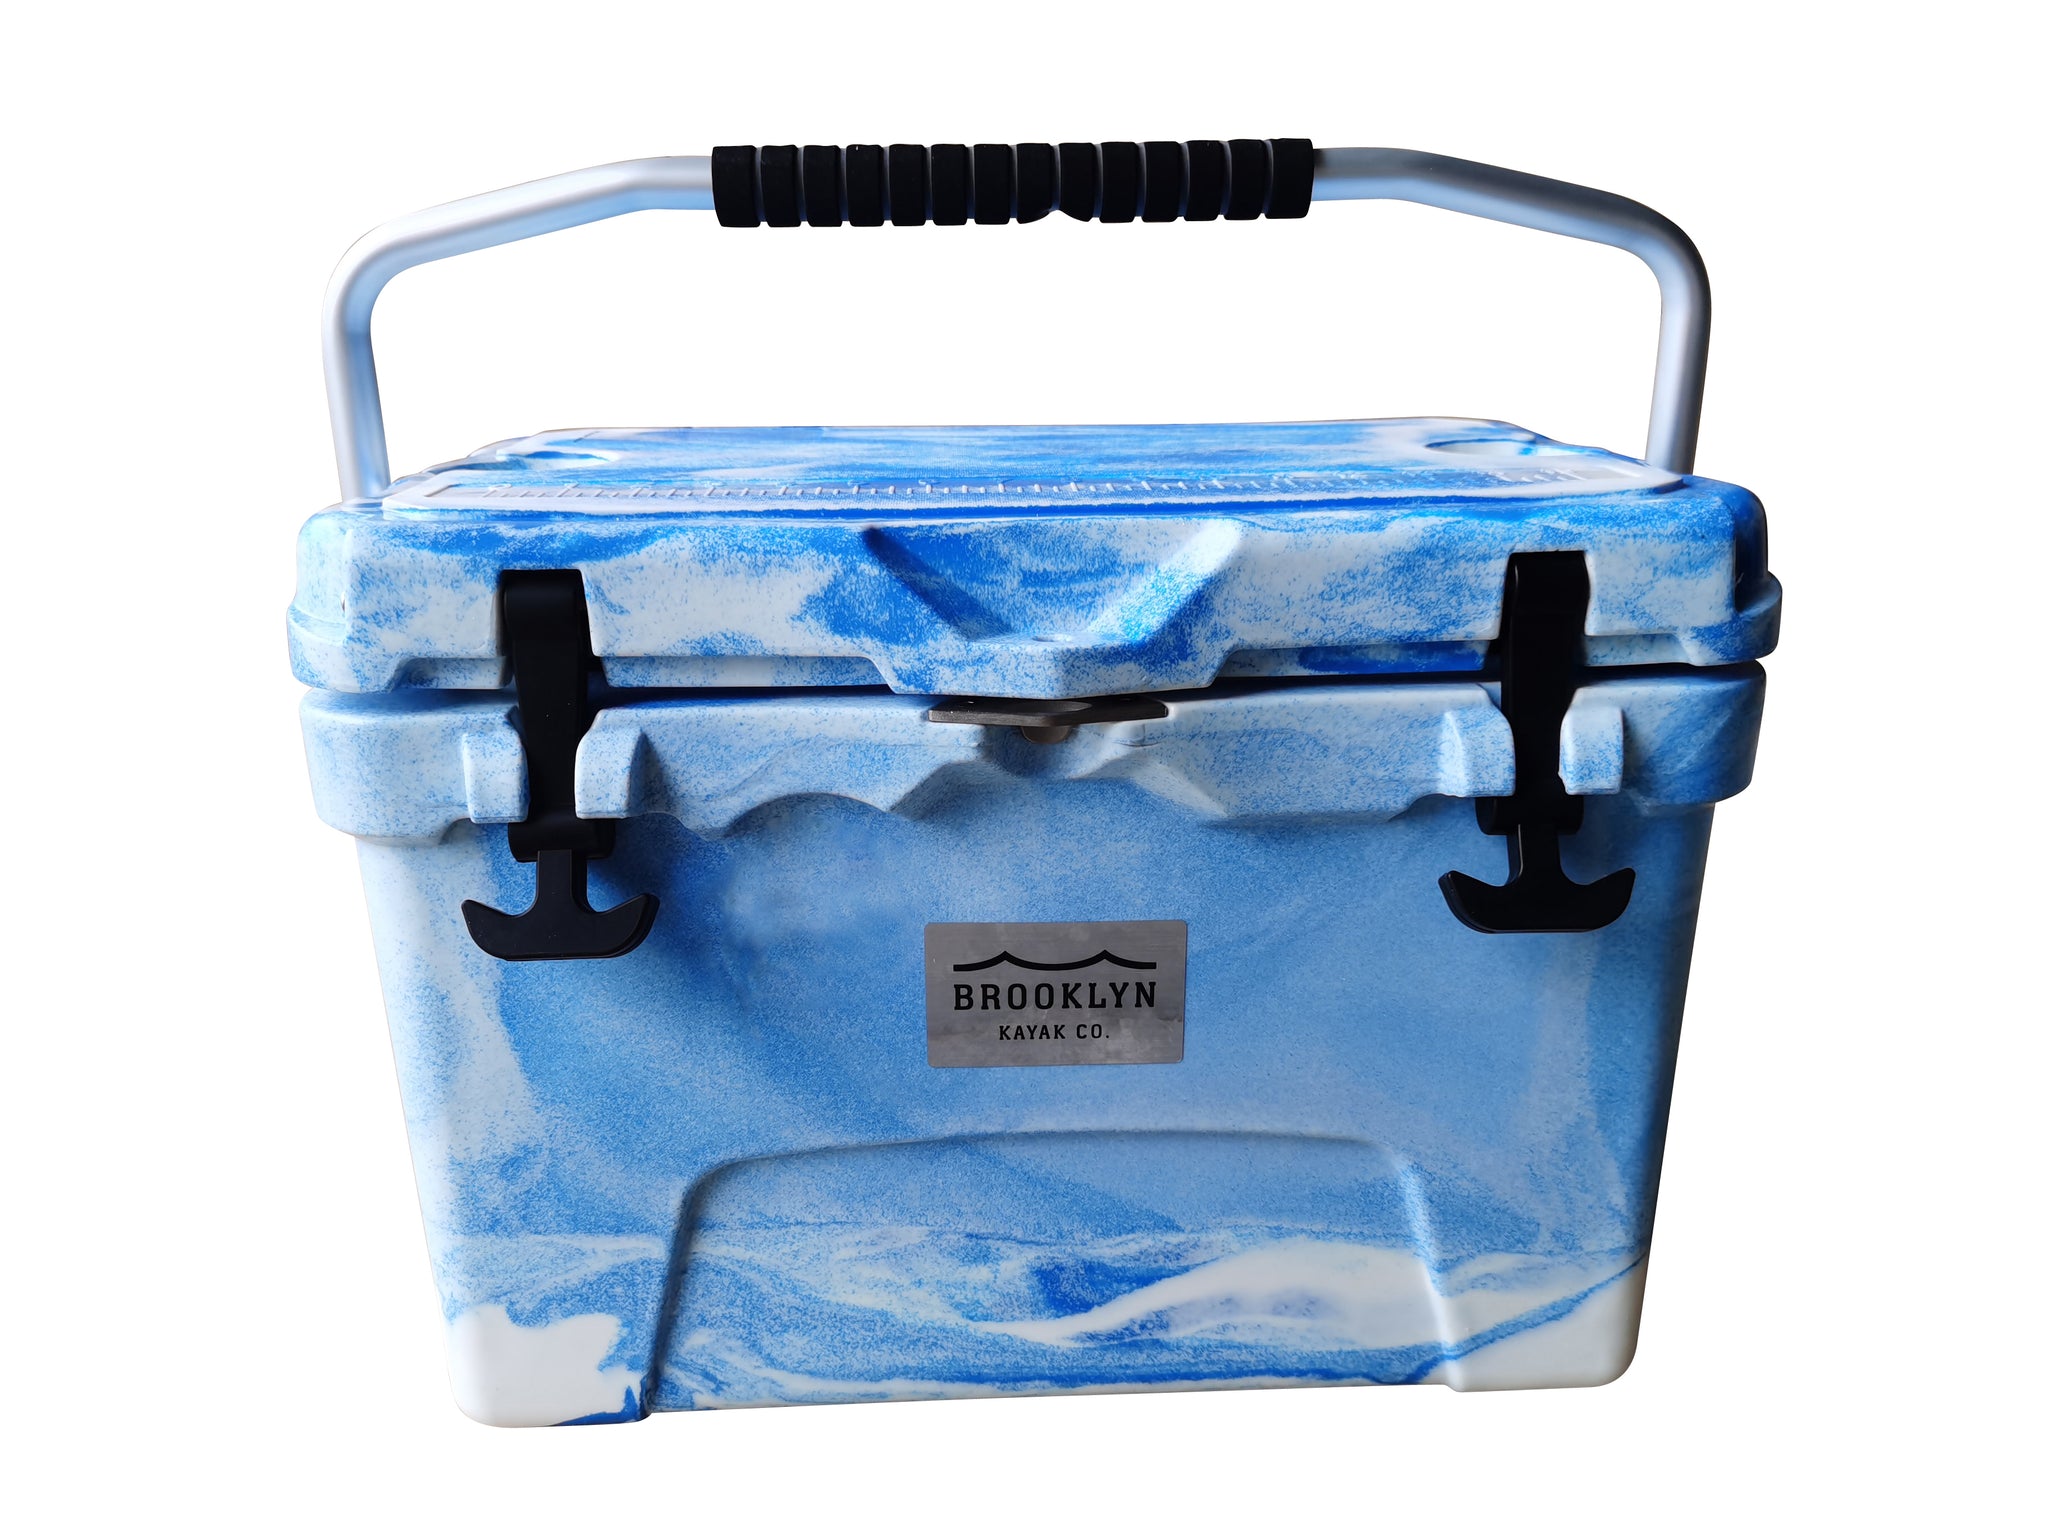  16L Commercial Insulated Rice Barrel, Refrigerated Transport  Bucket with One Botton Exhaust, Iced Container Beverage Carrier Dispenser  for Food Or Cold & Hot Drinks,Blue: Home & Kitchen